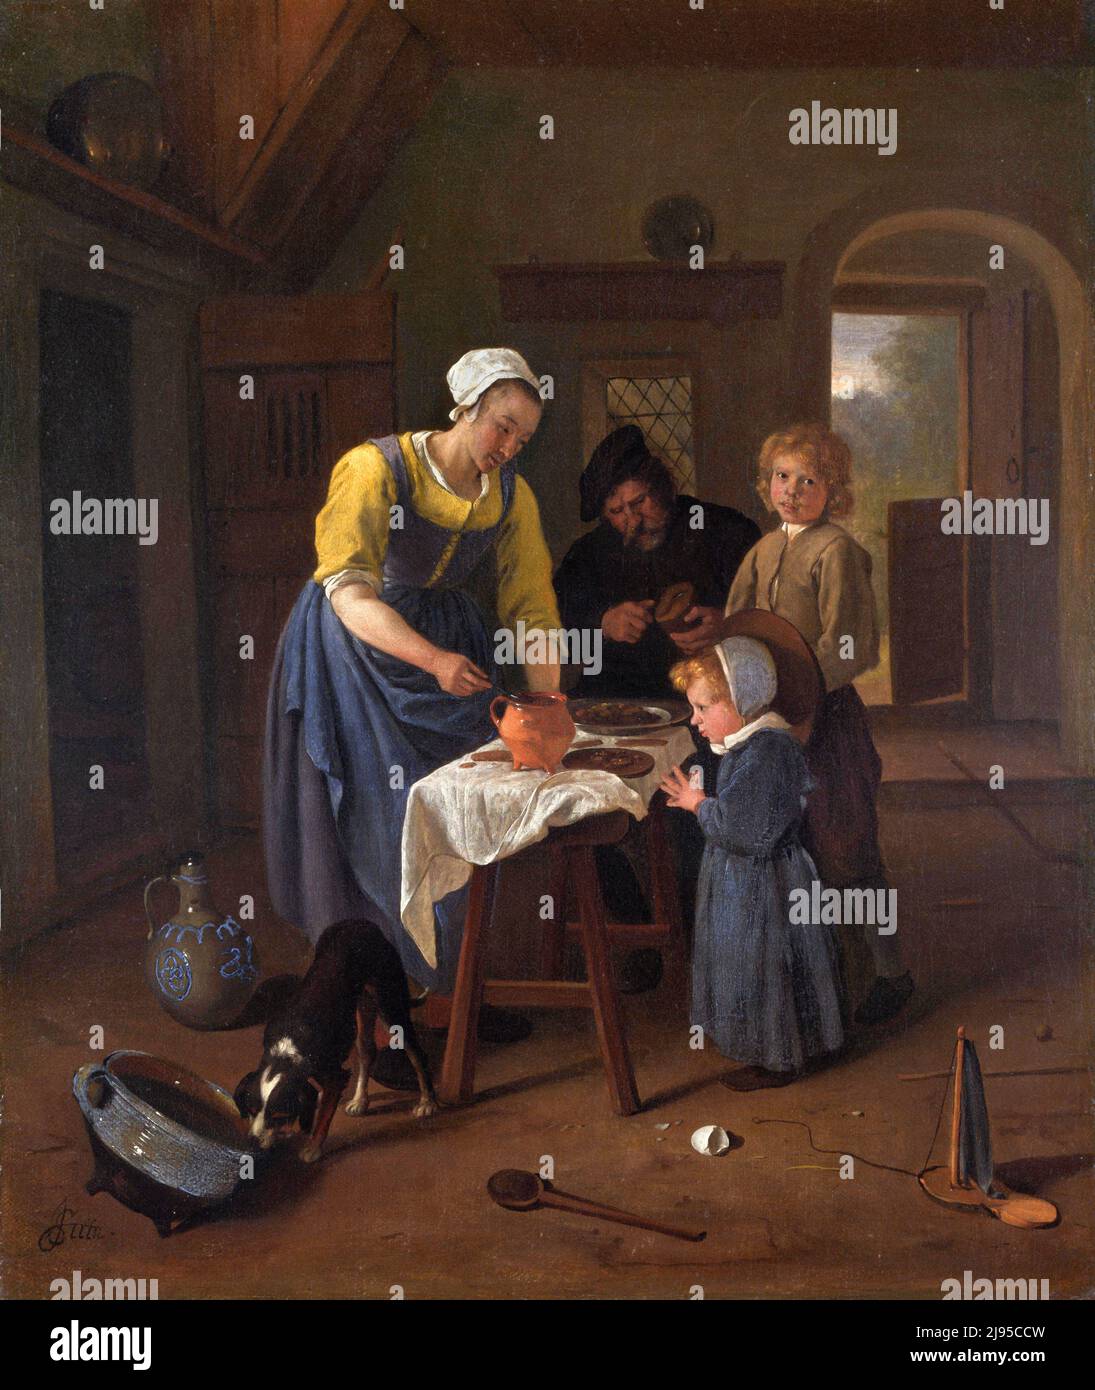 Jan Steen. 'A Peasant Family at Meal-time ('Grace before Meat')' by the Dutch Golden Age artist, Jan Havickszoon Steen (c. 1626 1679), oil on canvas, c.. 1665 Stock Photo